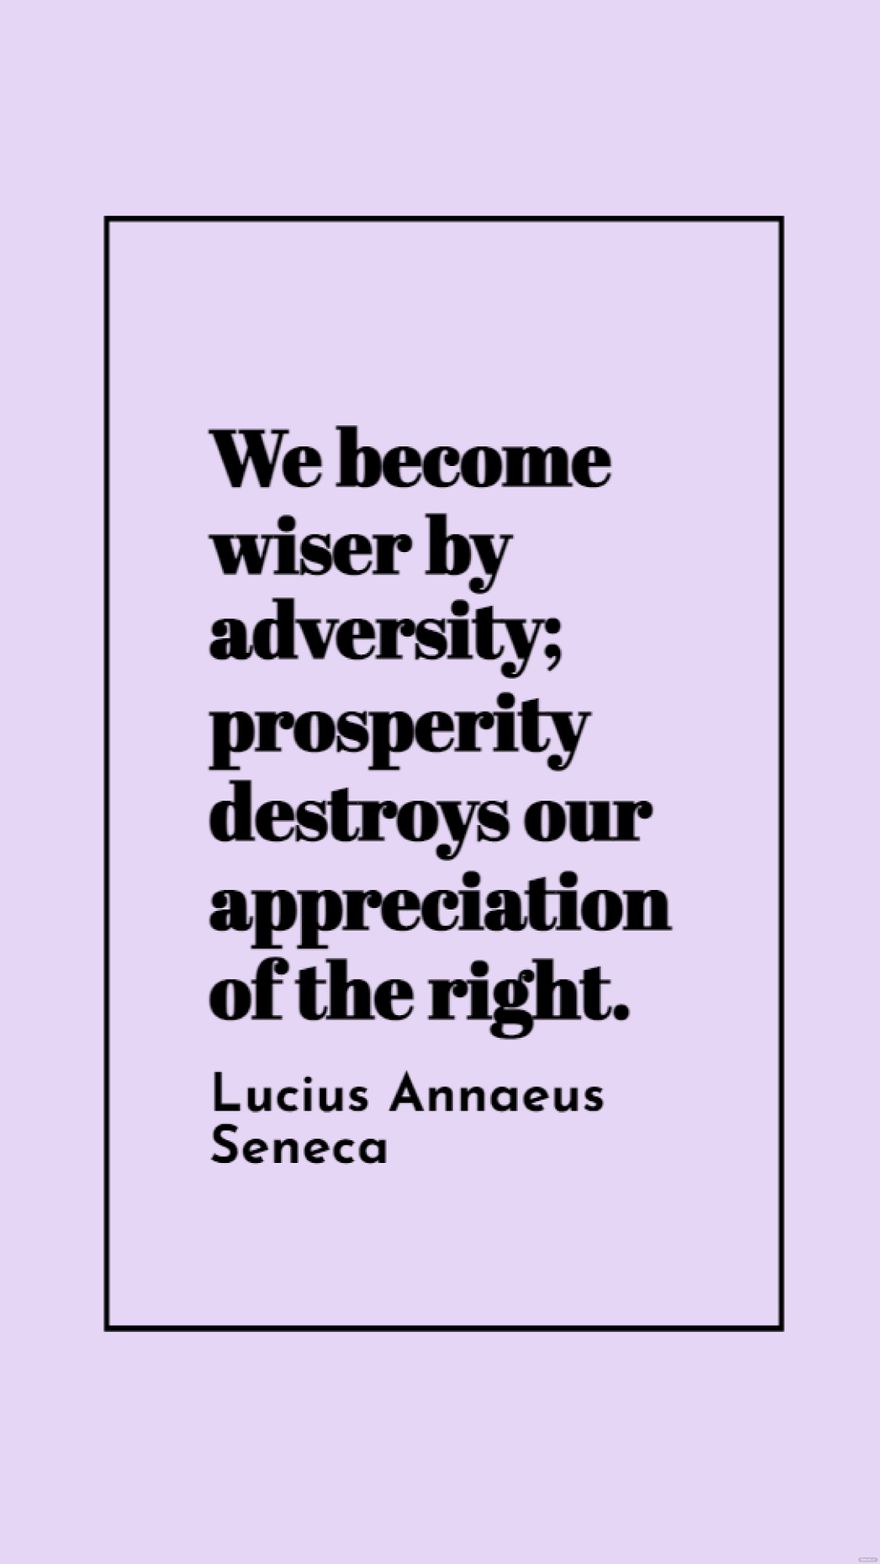 Lucius Annaeus Seneca - We become wiser by adversity; prosperity destroys our appreciation of the right.